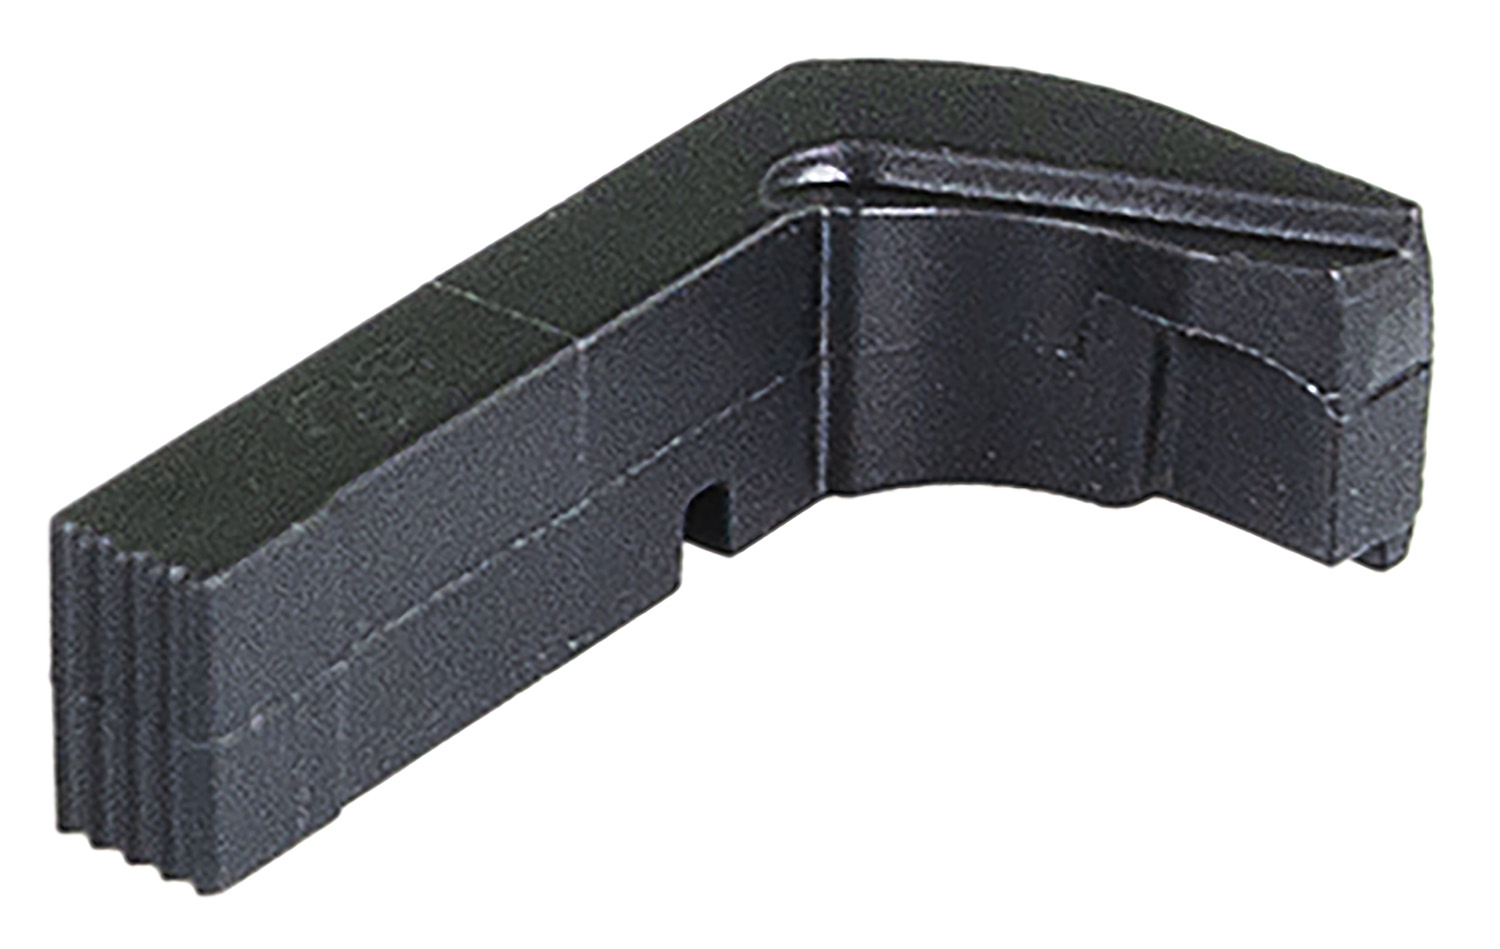 Sct Manufacturing 210190004 Compact and Full Mag Catch Compatible with Glock Gen3 Black Plastic